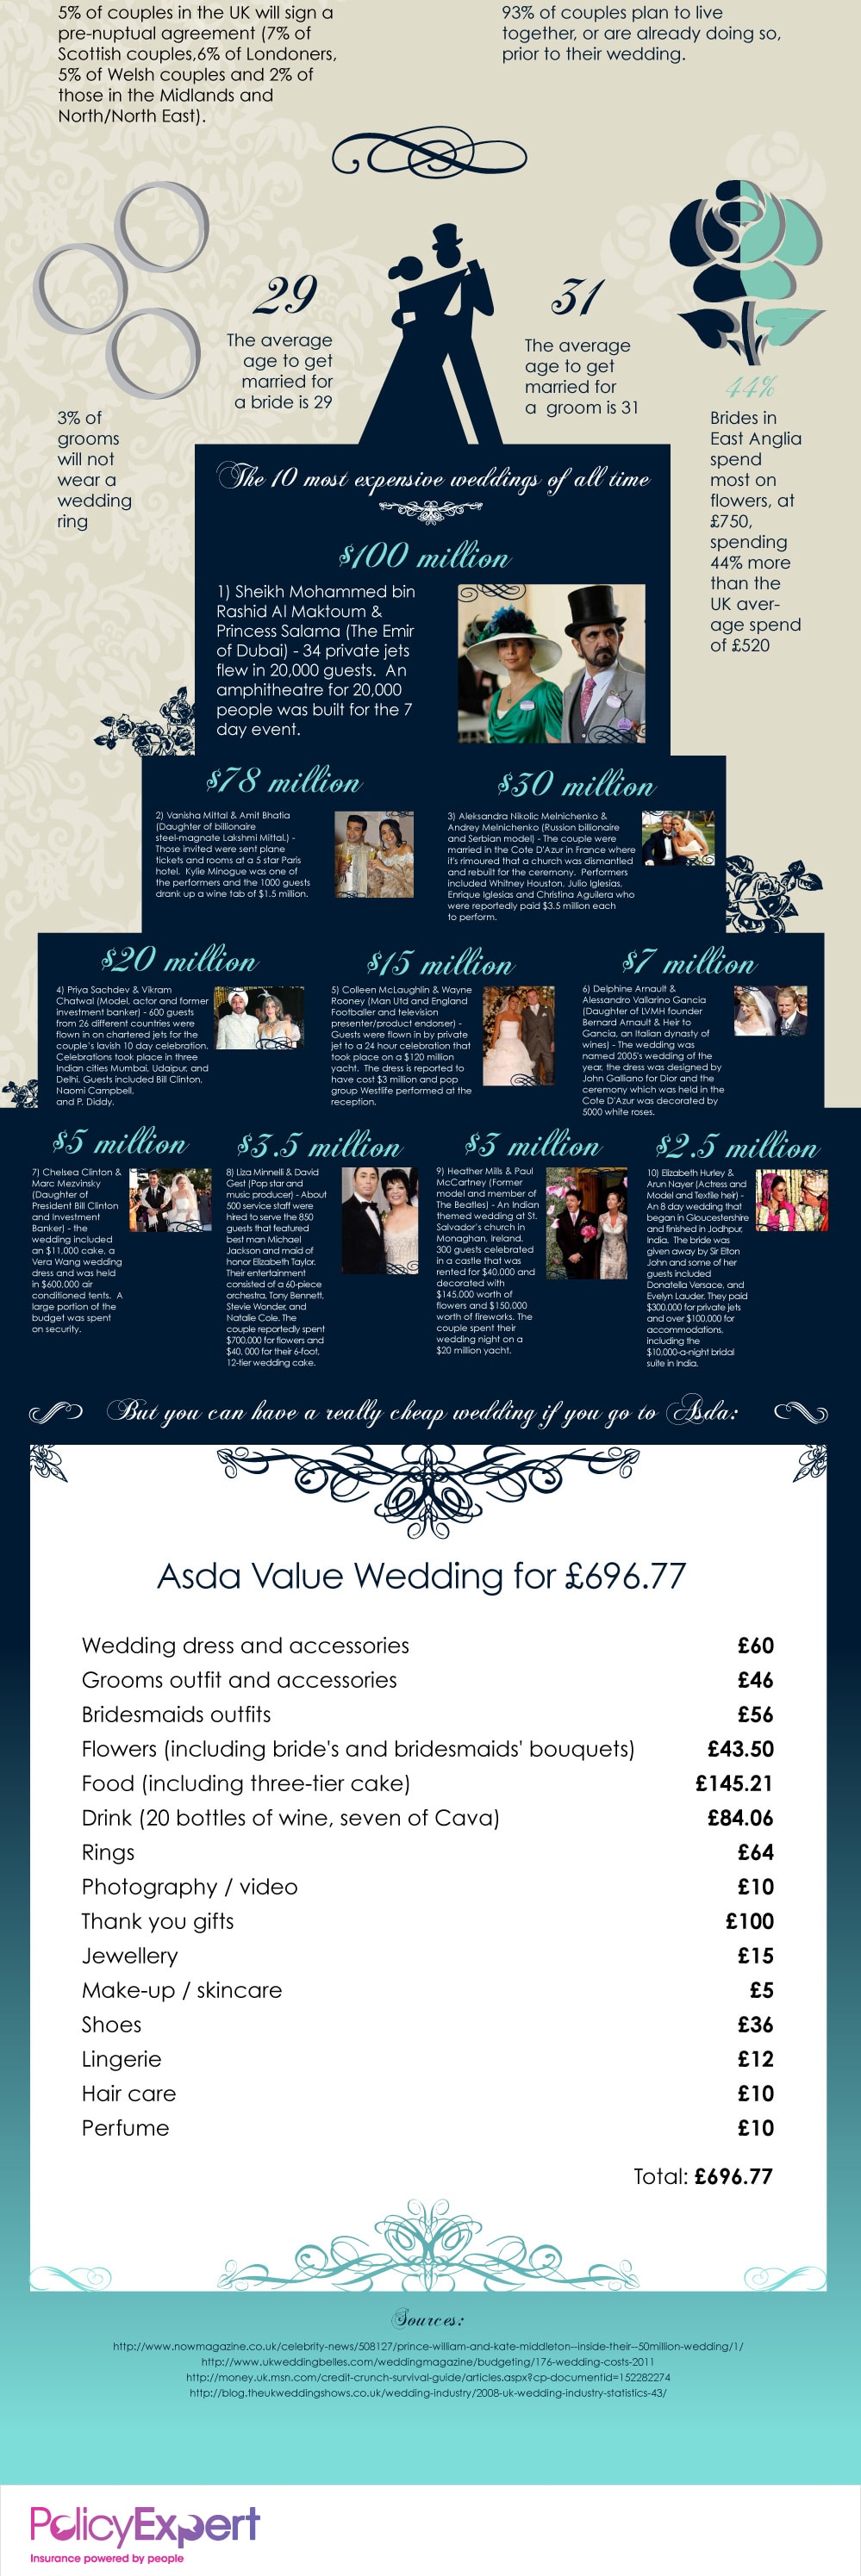 The Cost Of William & Kate's Wedding [Infographics] | Bit Rebels